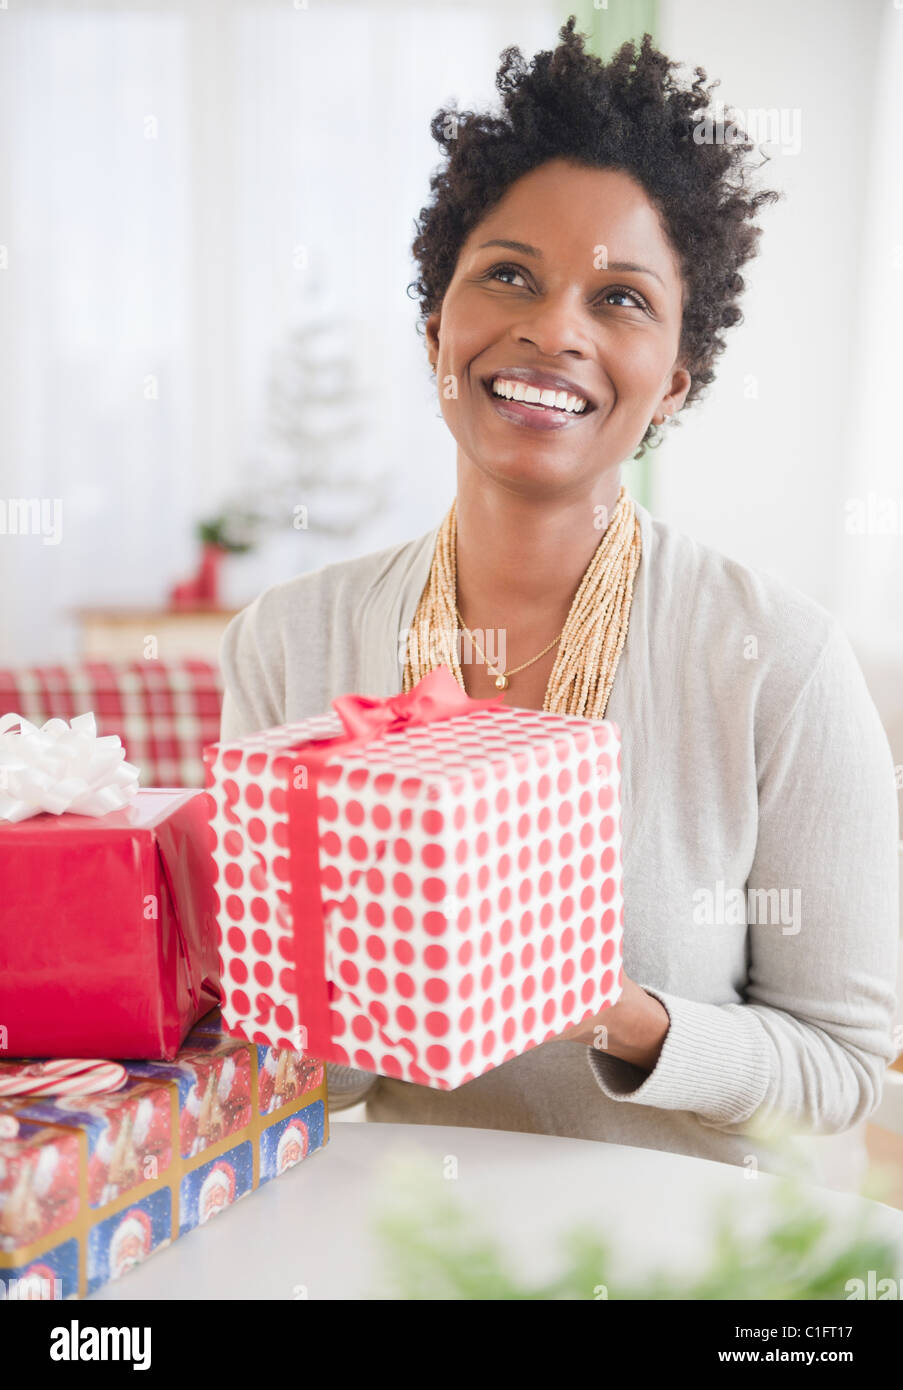 Black woman holding wrapped gift Banque D'Images